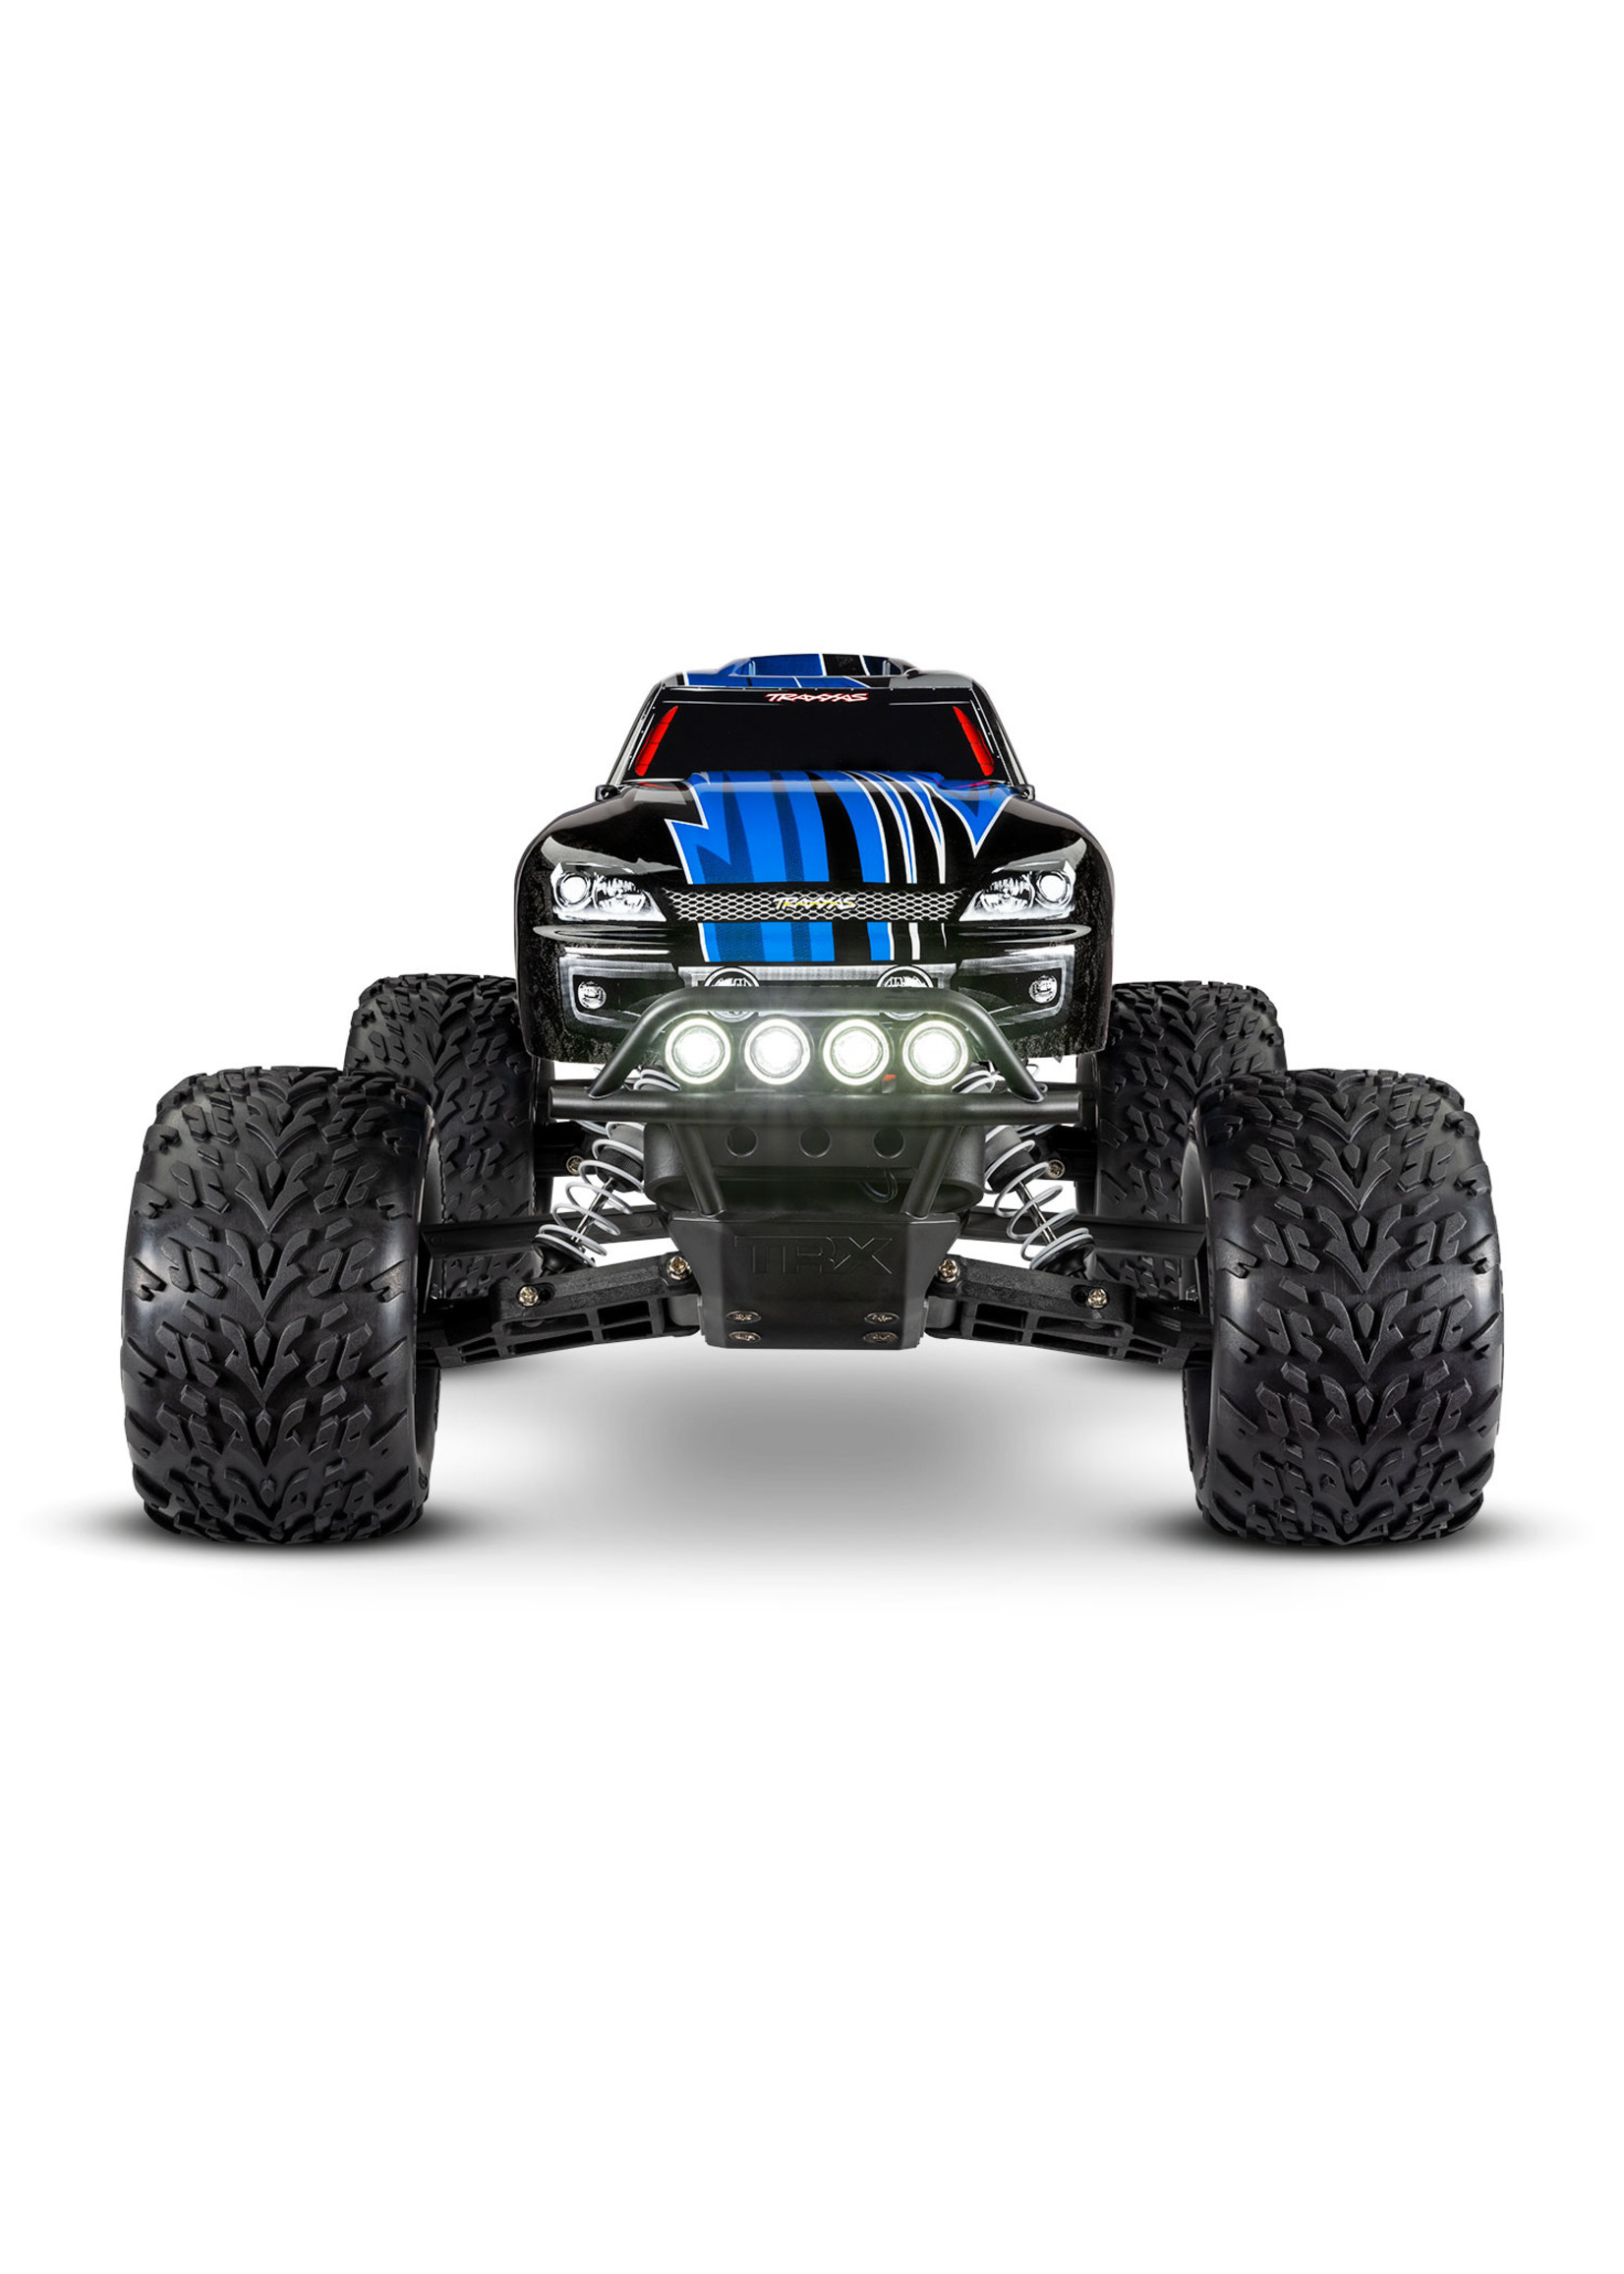 Traxxas 1/10 Stampede 2WD RTR Monster Truck with Lights - Blue